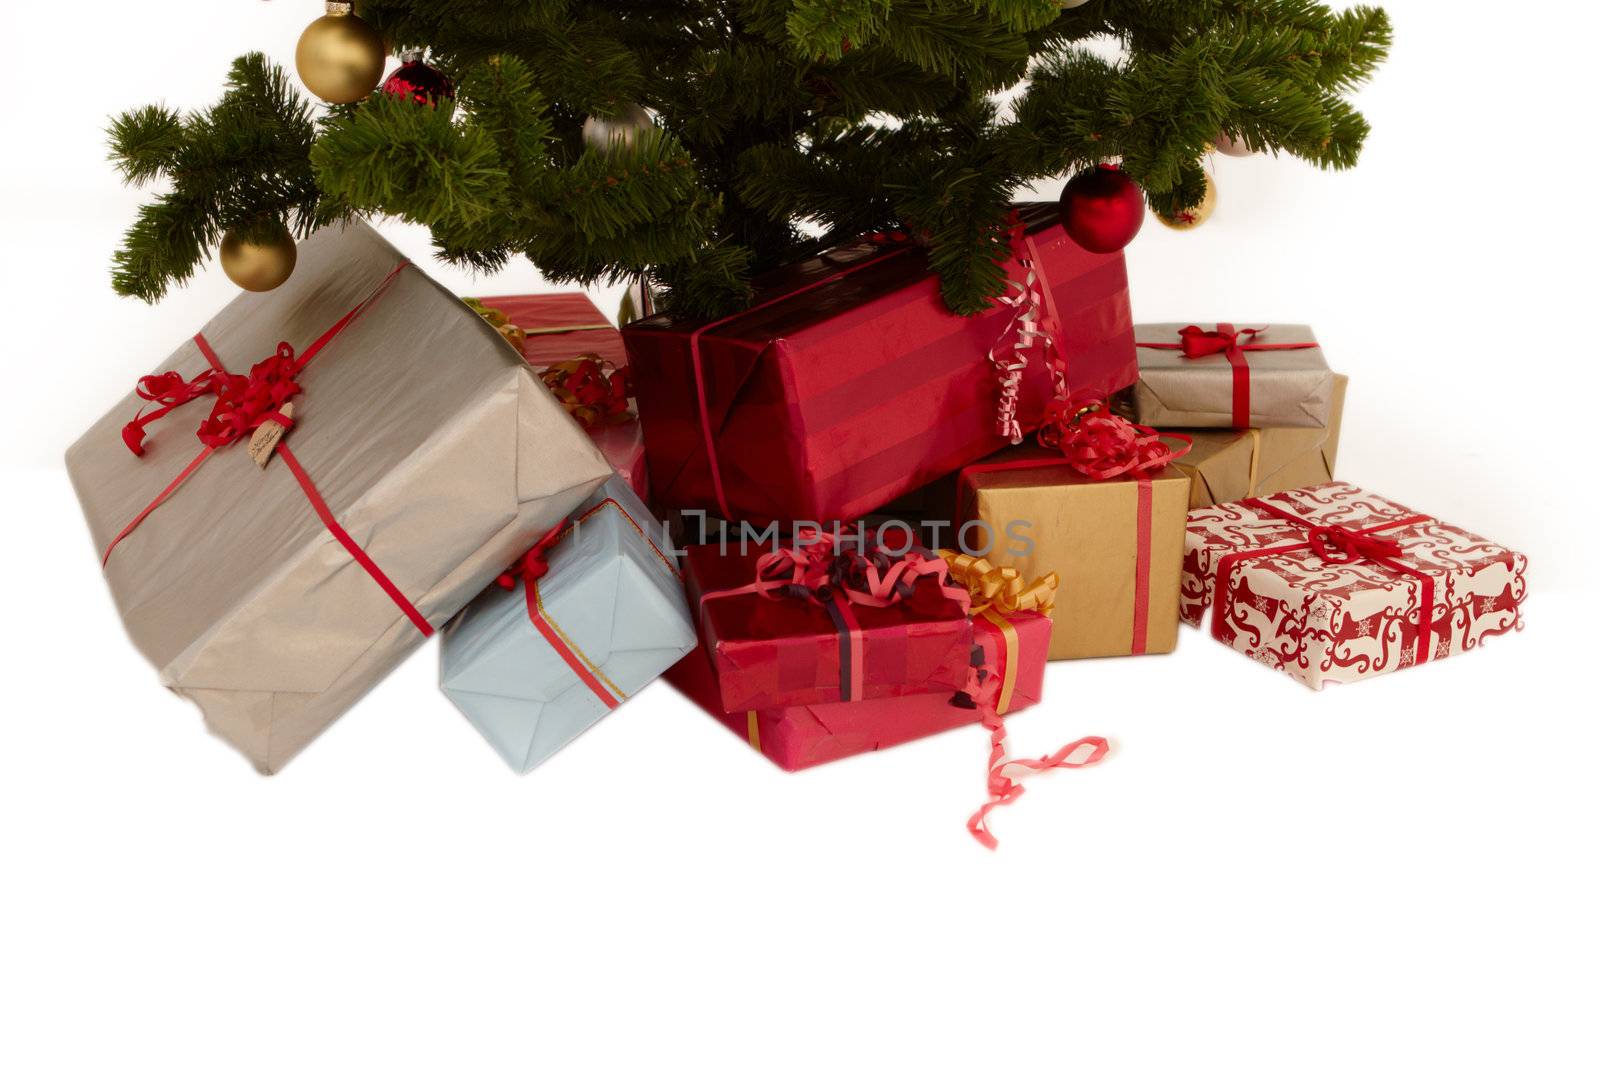 Christmas tree - gifts under a tree